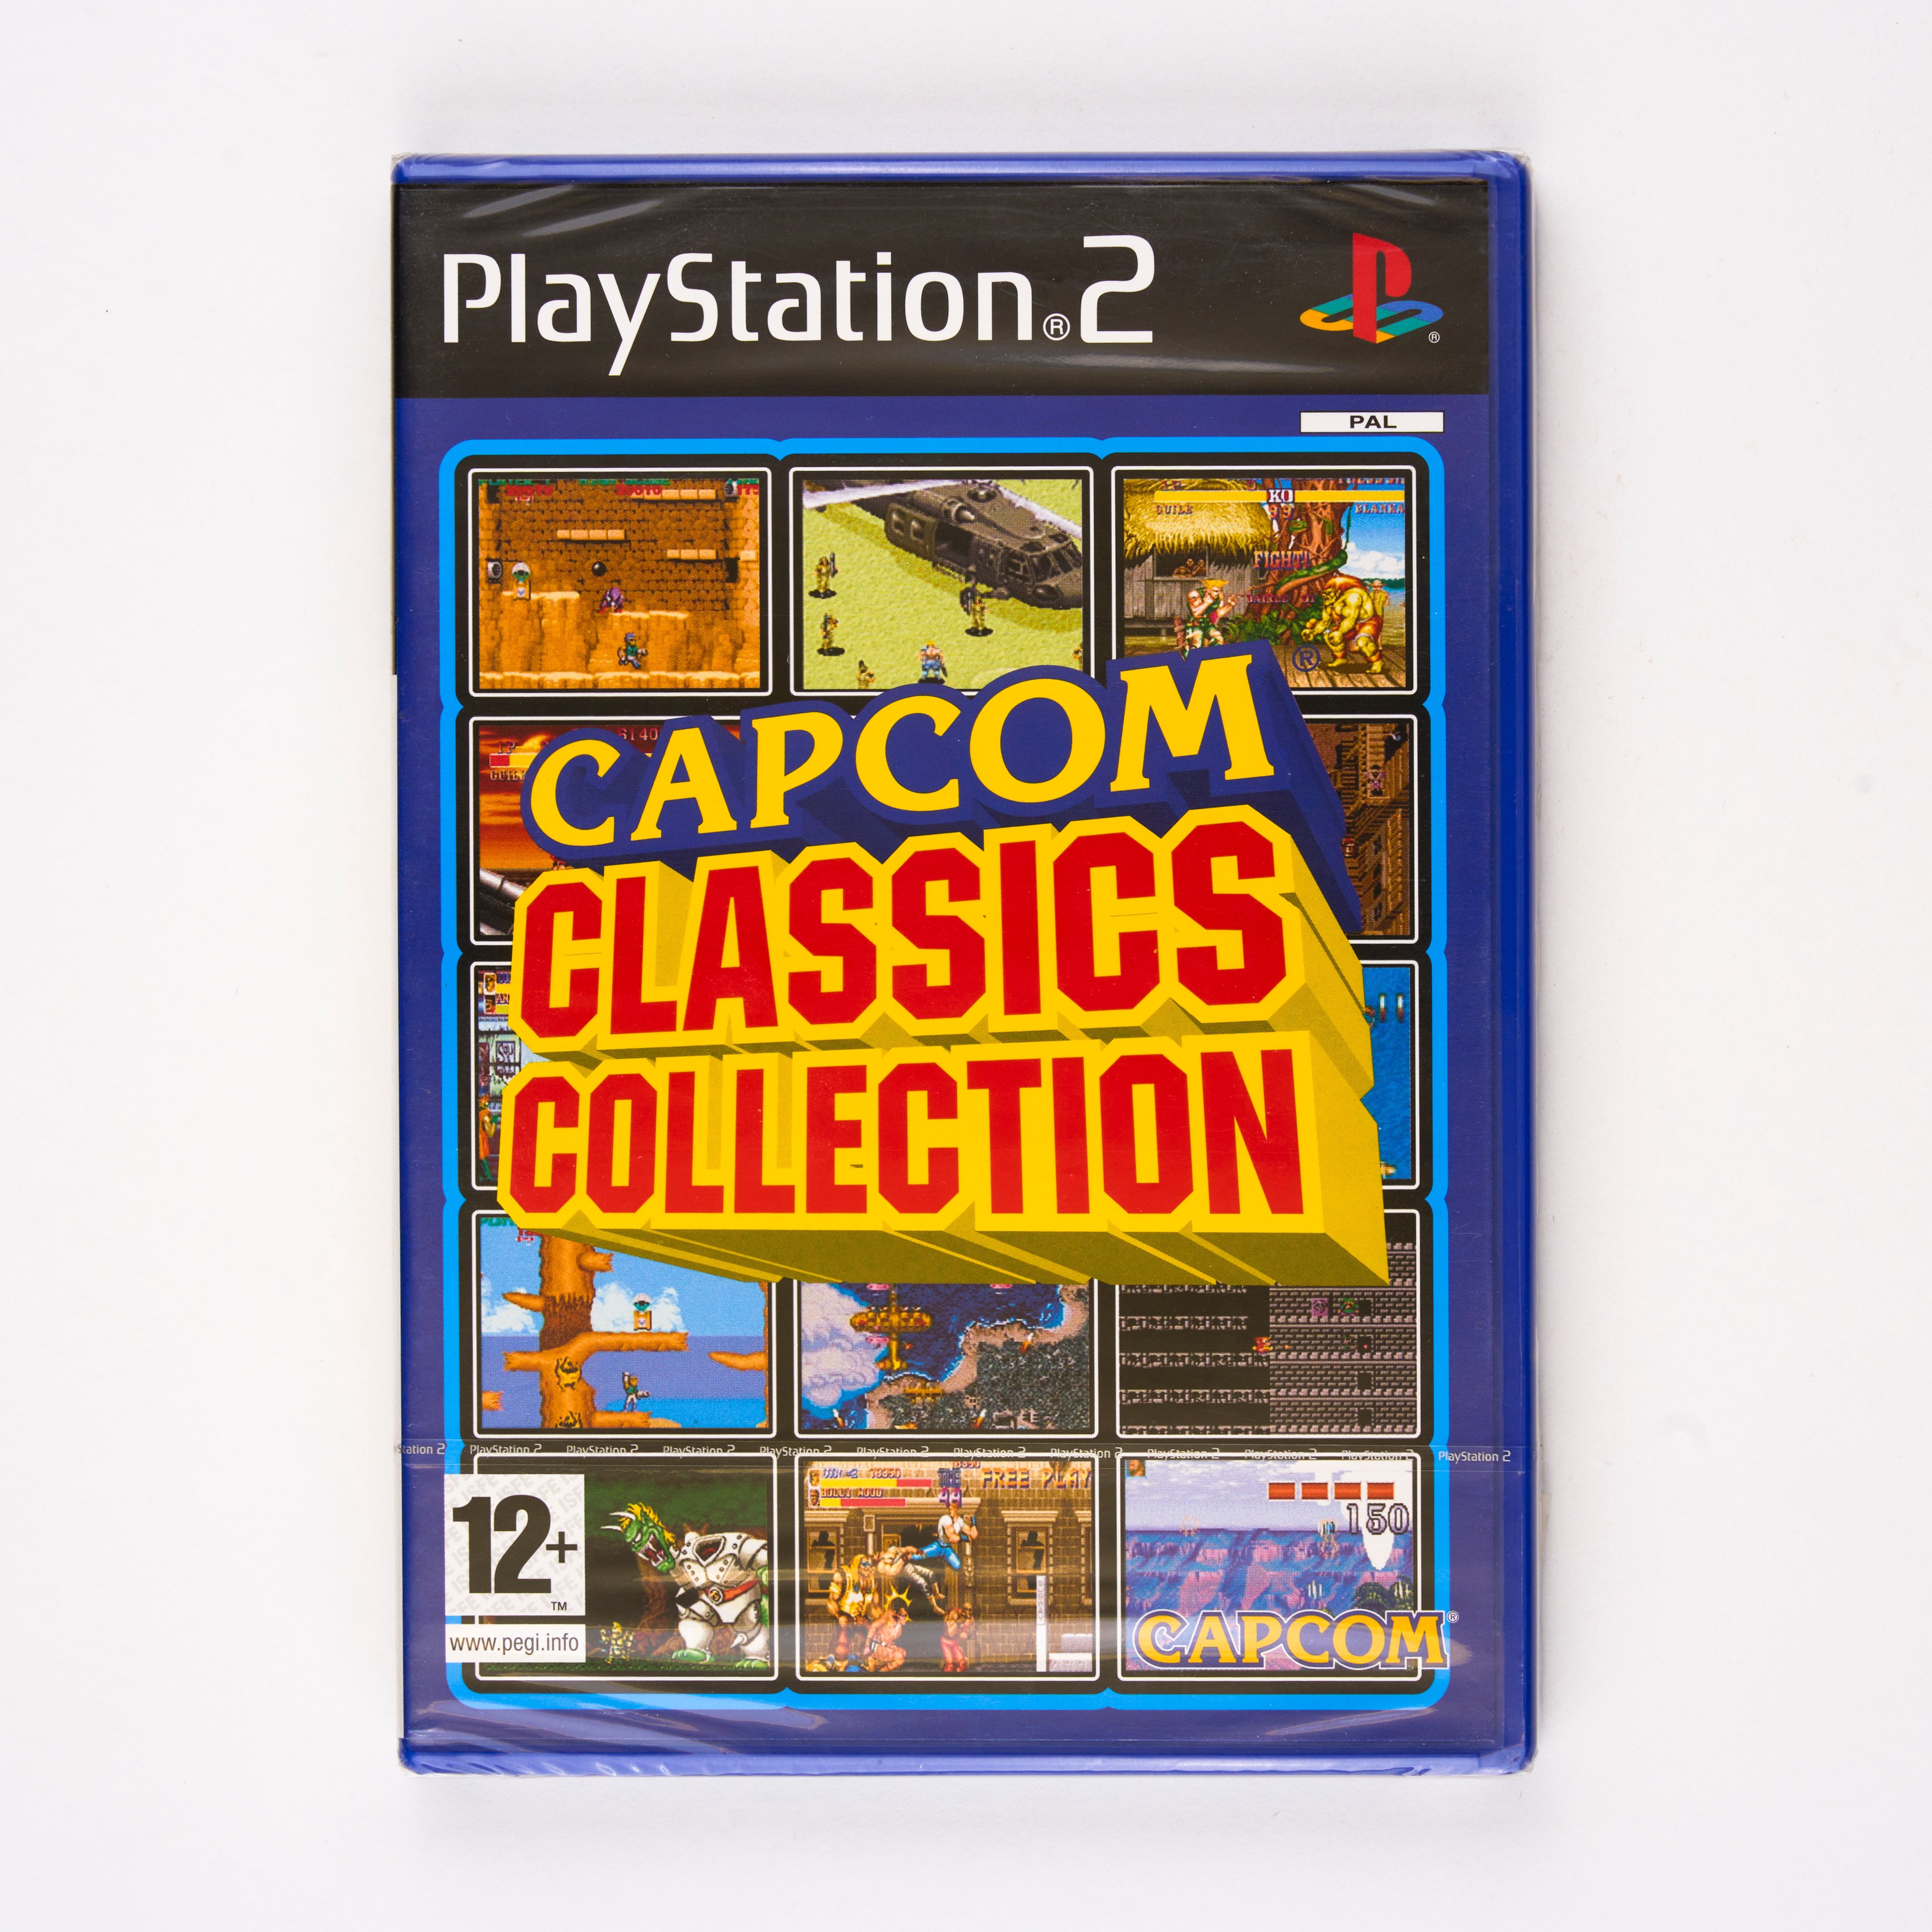 Sony - Capcom Classics Collection Volume 1 PAL - Playstation 2 - Sealed